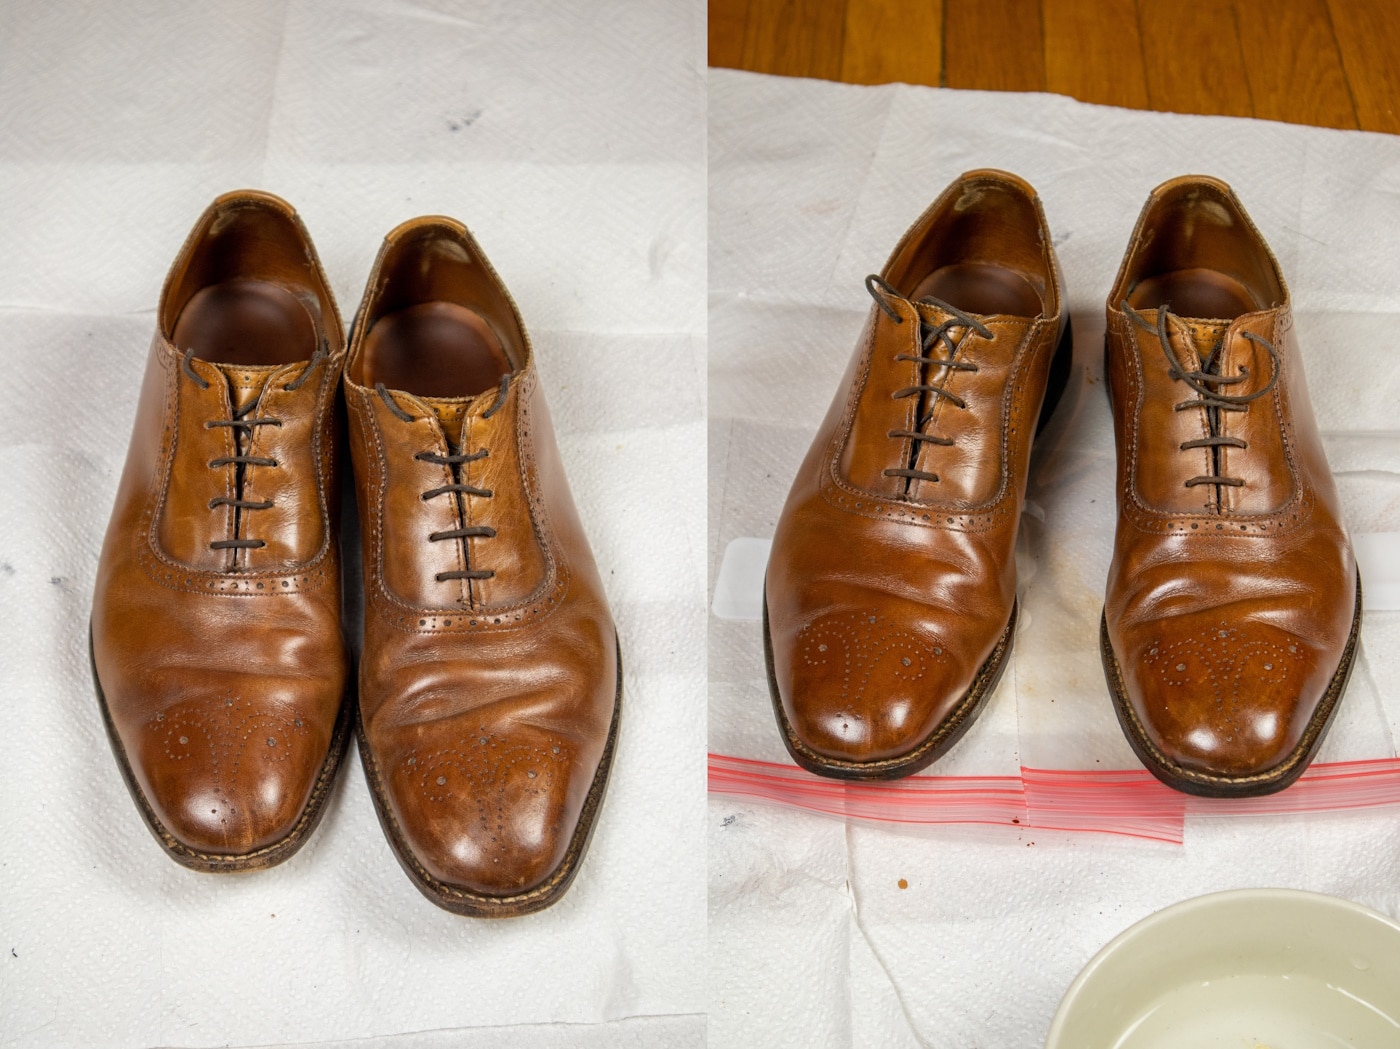 Brown Shoes Before and After Shining